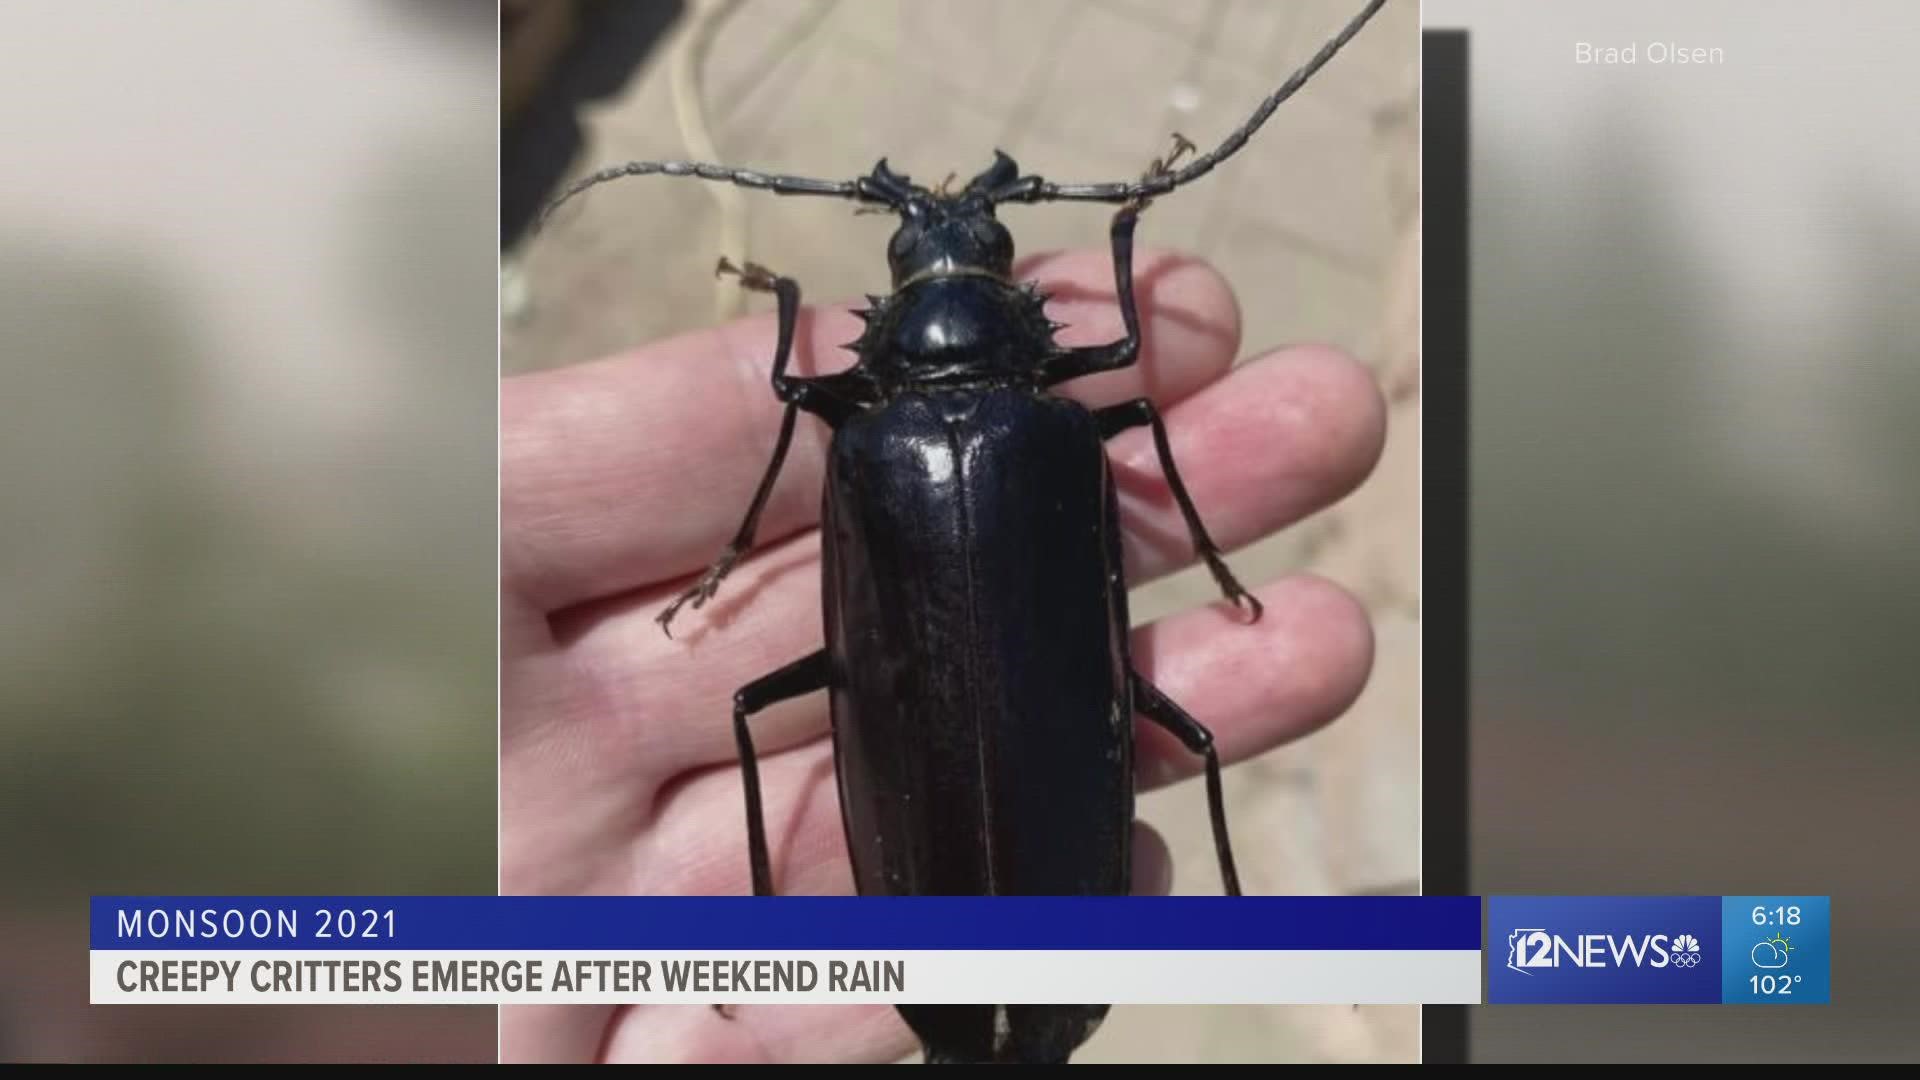 Here are a few of the bugs that come out during Arizona rains 